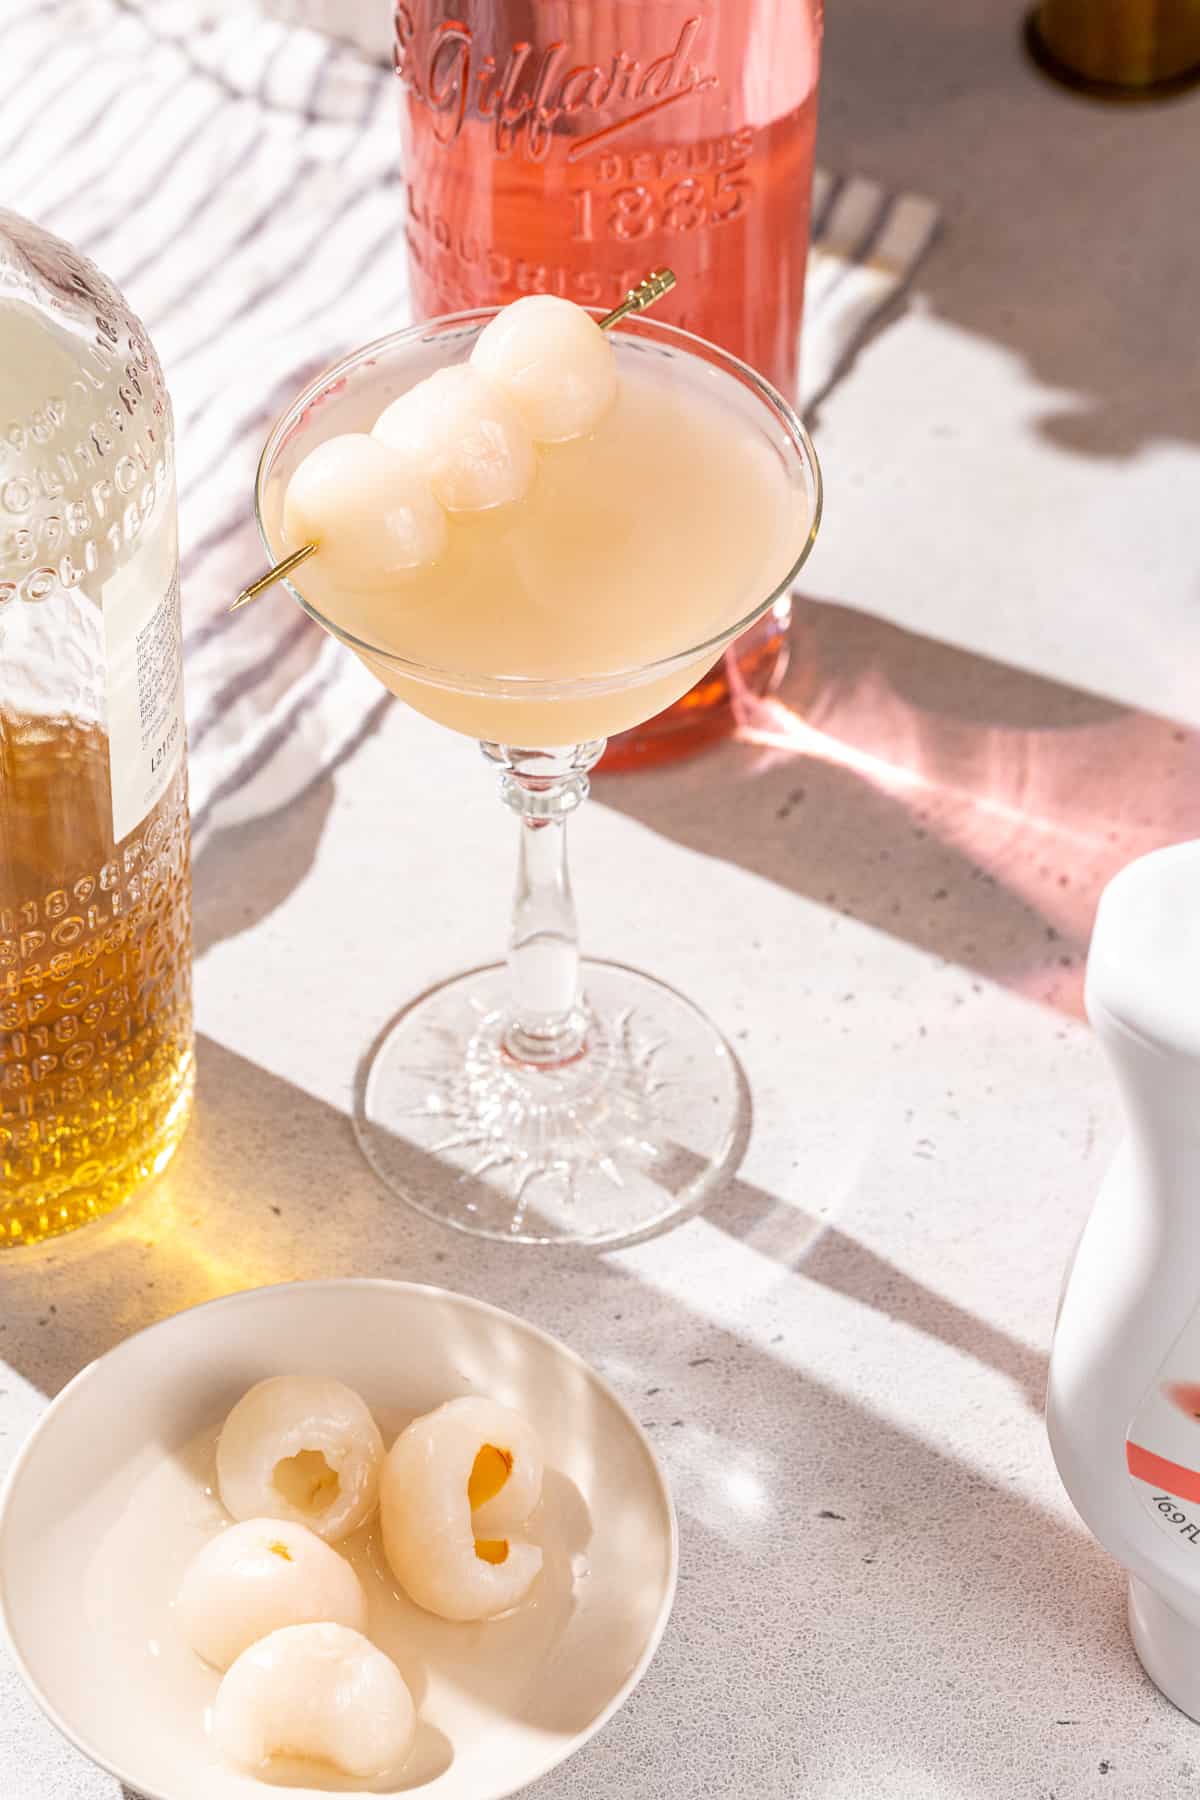 Lychee Gin martini on a countertop. The drink is in a coupe glass and is surrounded by lychee fruits, lychee puree, vermouth and lychee liqueur.